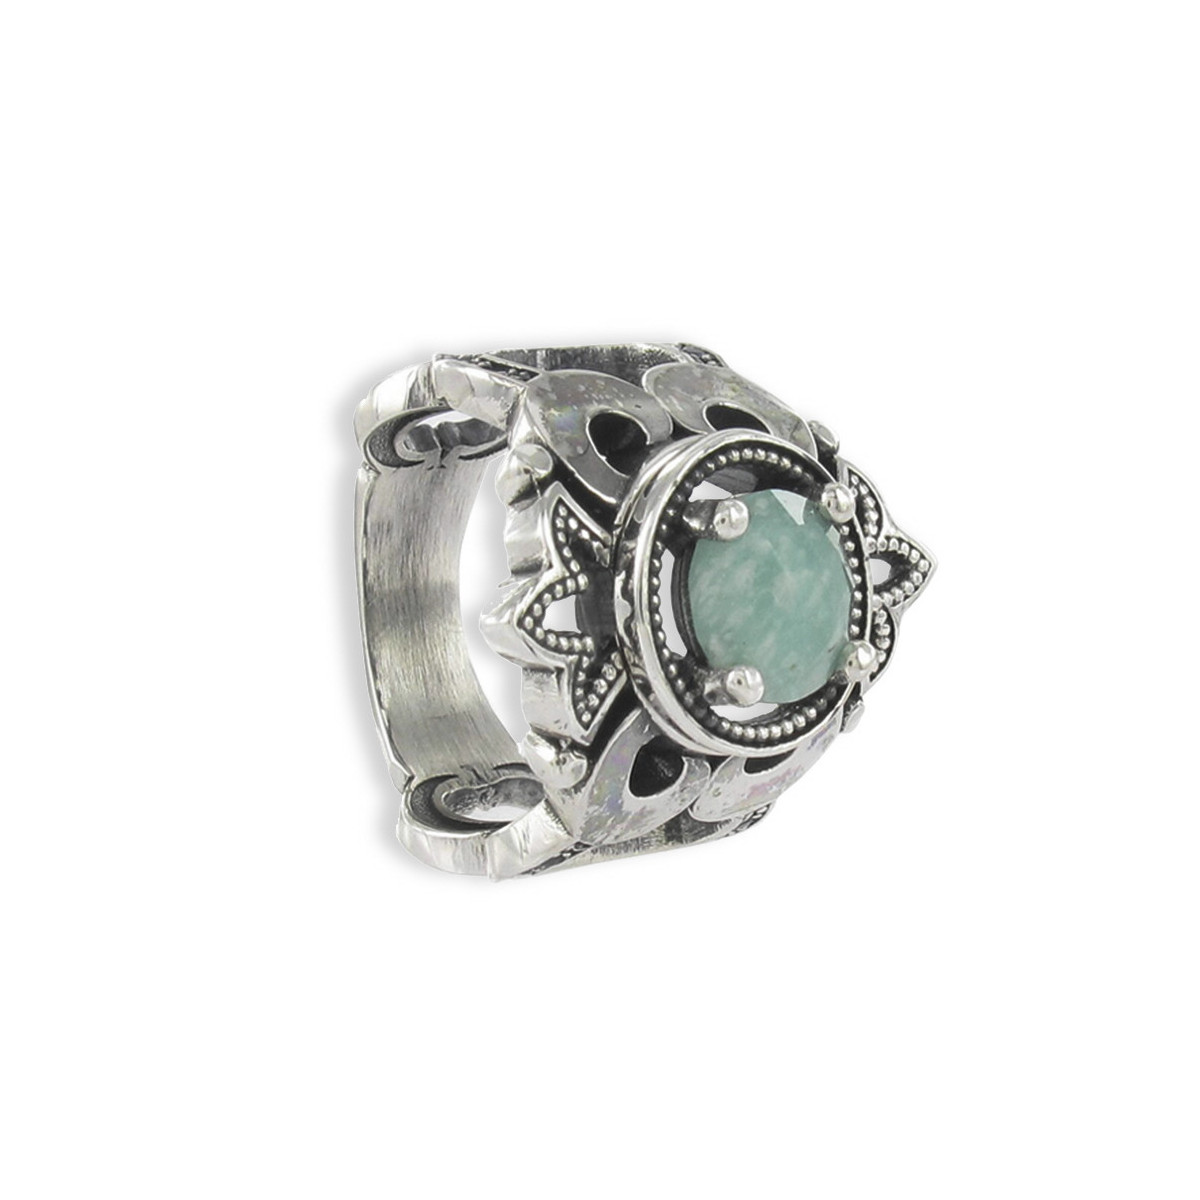 STERLING SILVER DESIGN RING WITH AMAZONITE